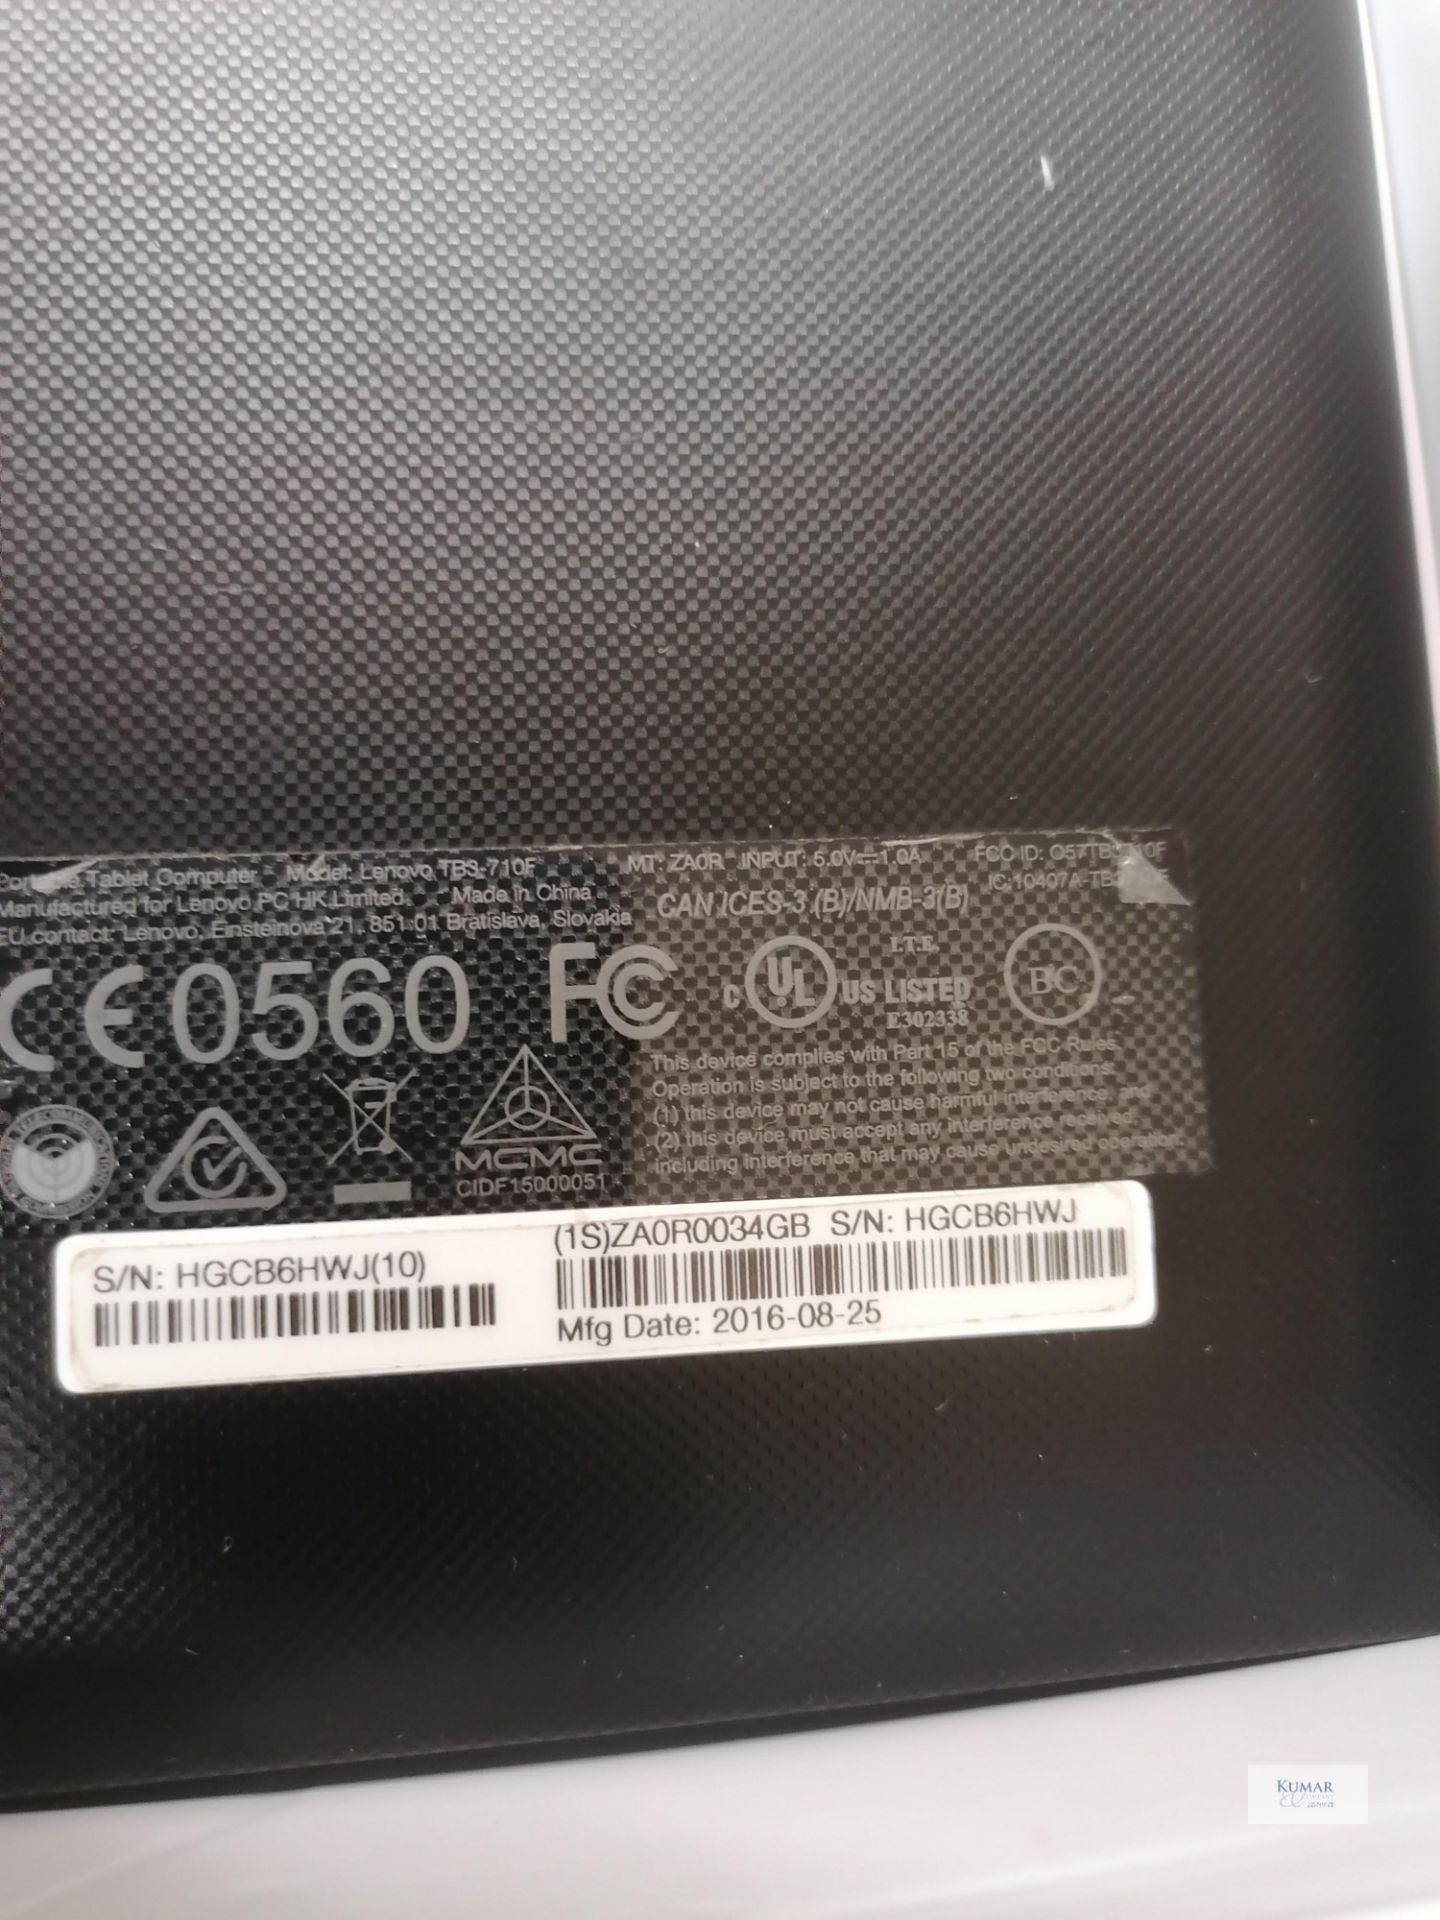 Lenovo TB3-710F 7" 16GB Table Man 25 08 2016 Updated 21 10 2020 In box,cable and charger - Image 6 of 6